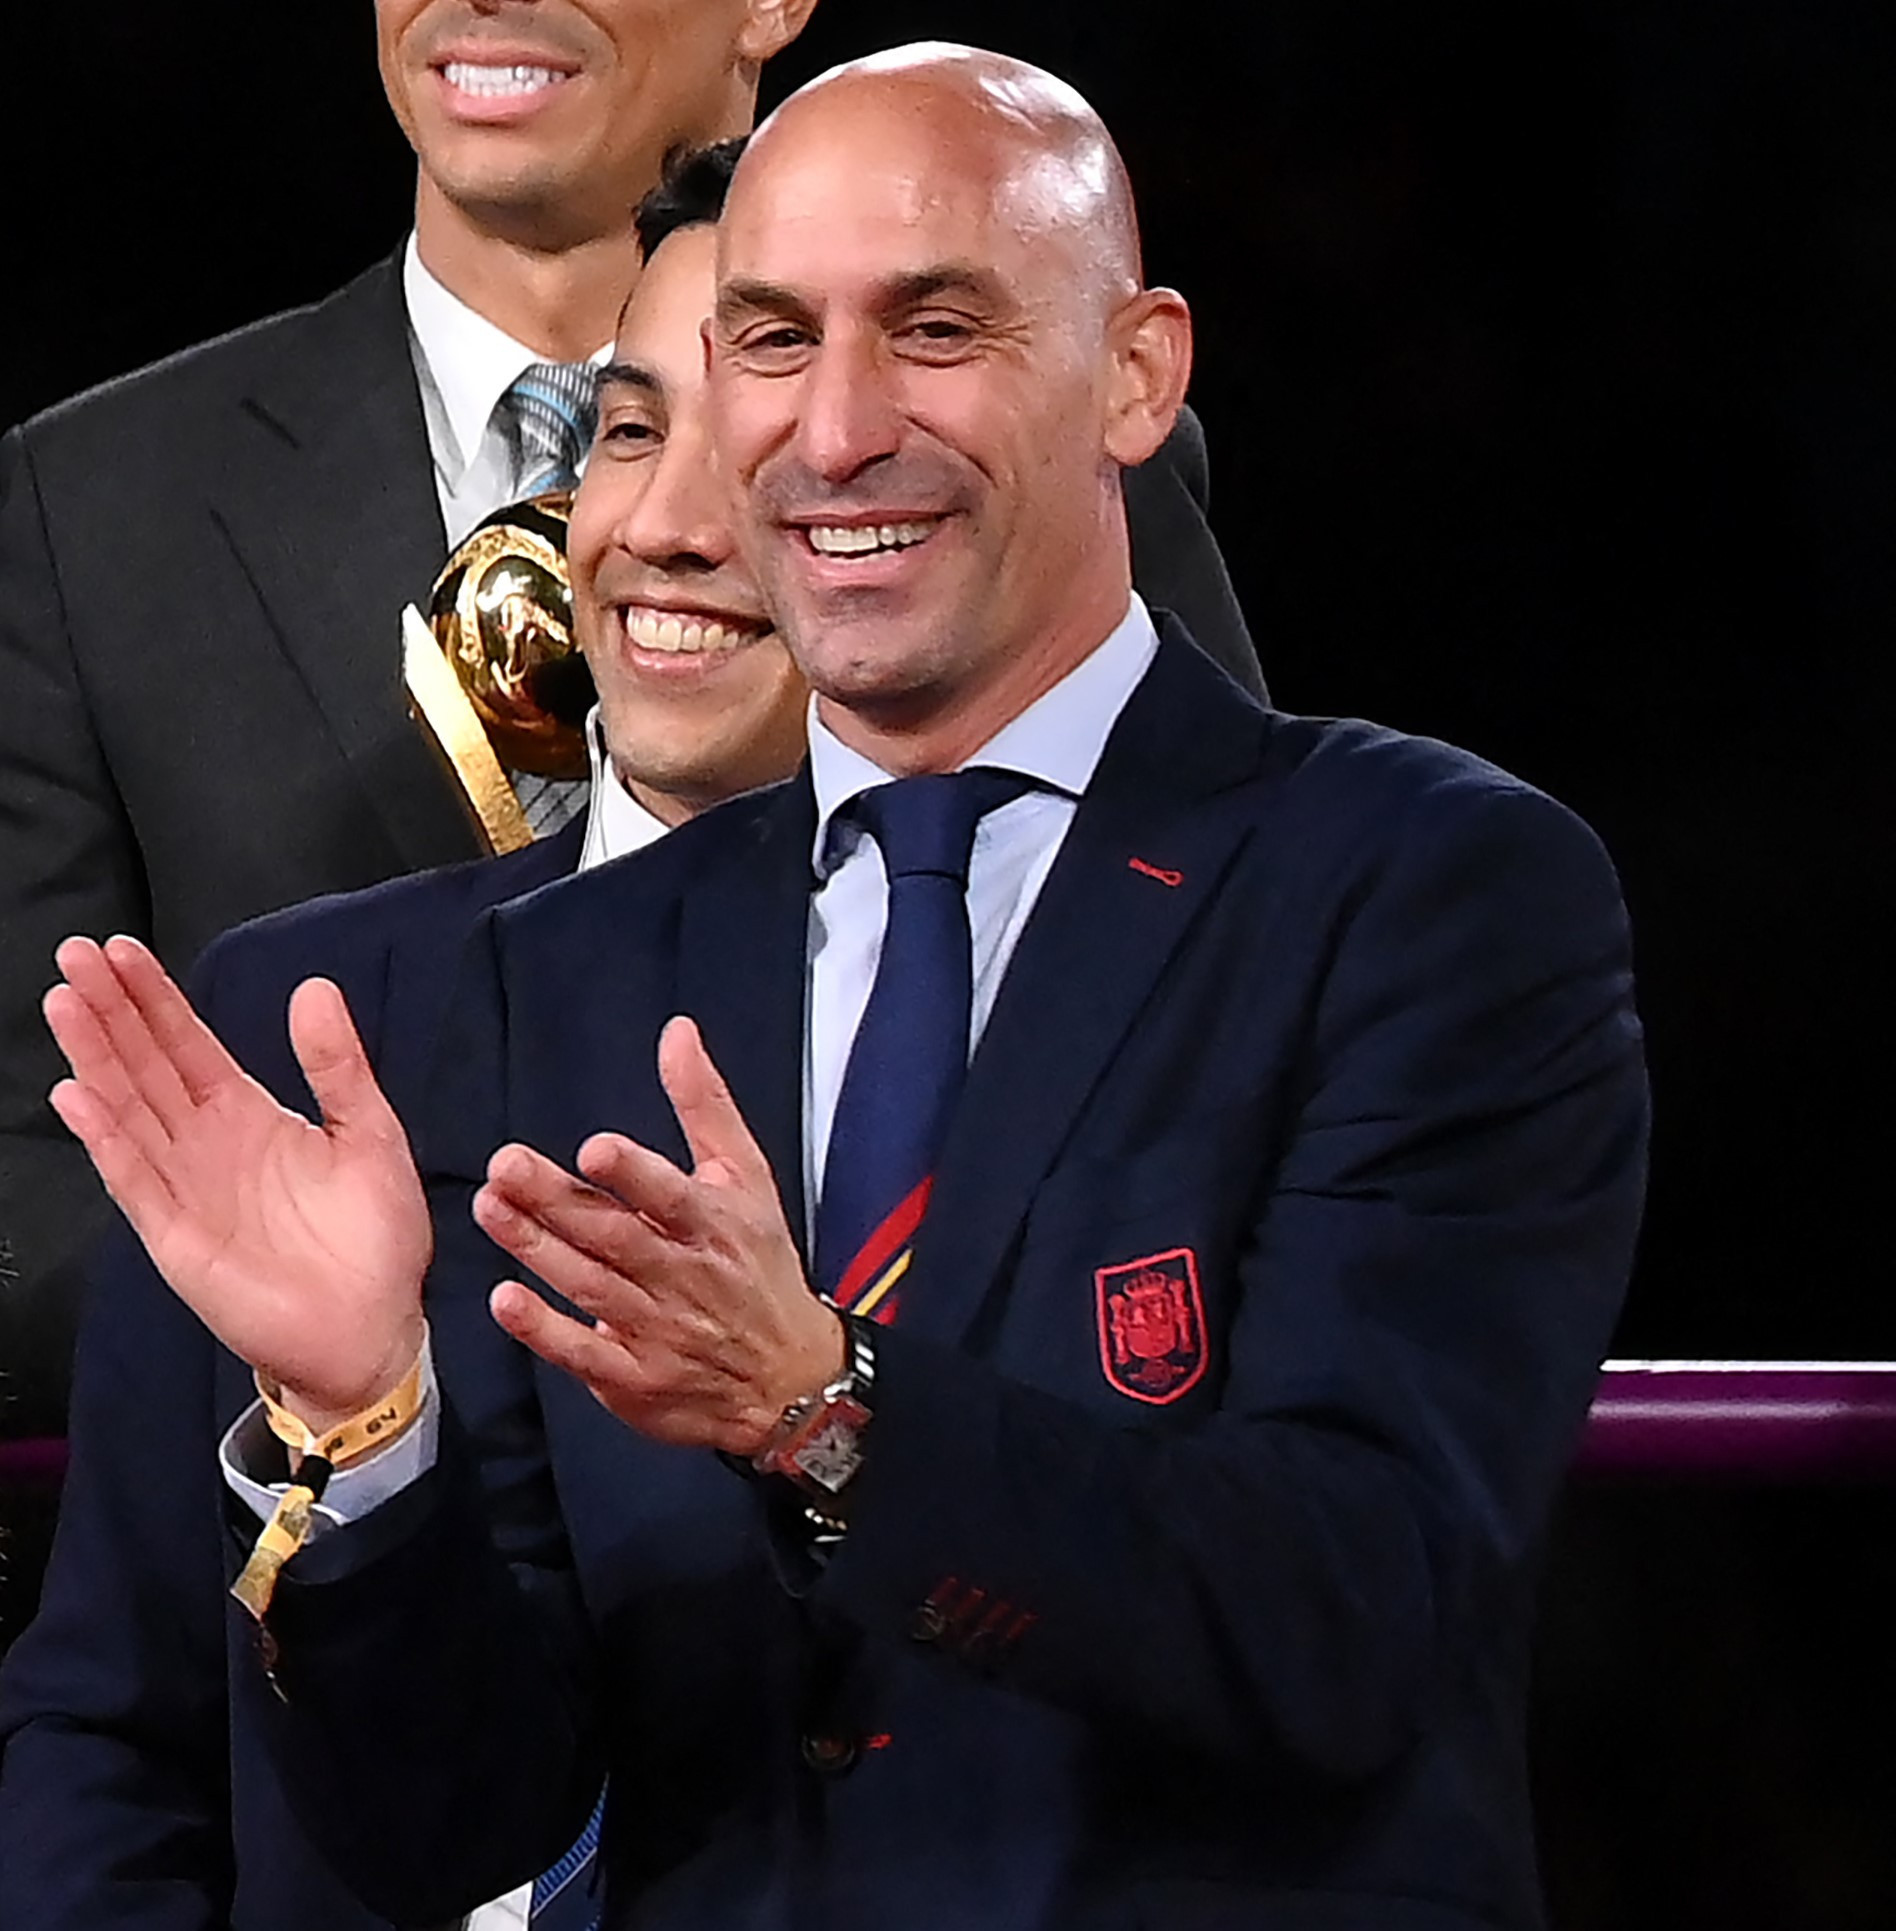 Spanish prosecutor files high court complaint against Rubiales over World Cup kiss as players start strike